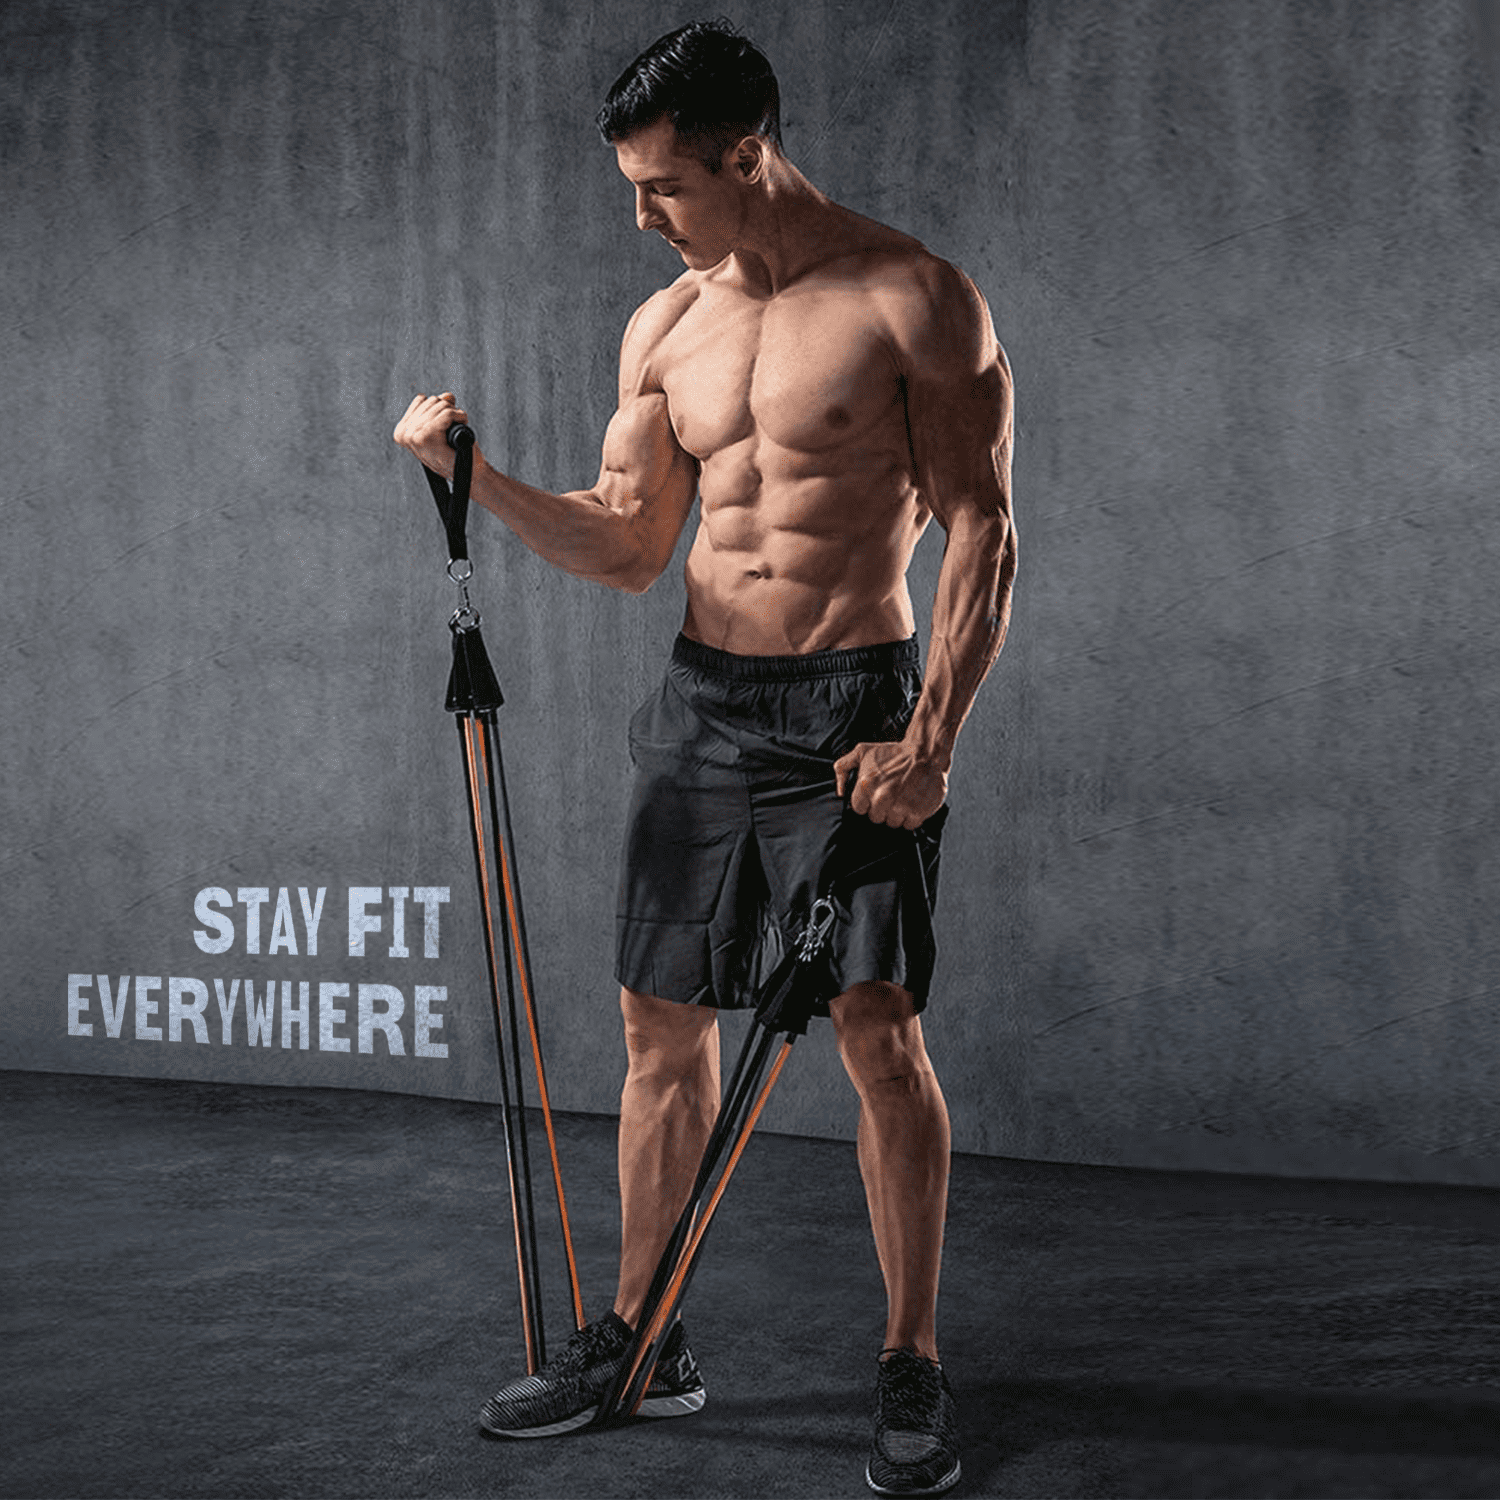 for Men Women Home Workouts and Resistance Training HUHHRRY Resistance Bands Set -【2020 Upgraded】 Exercise Bands with Handles 100% Life Time Guarantee Ankle Straps Door Anchor and Guide Book 